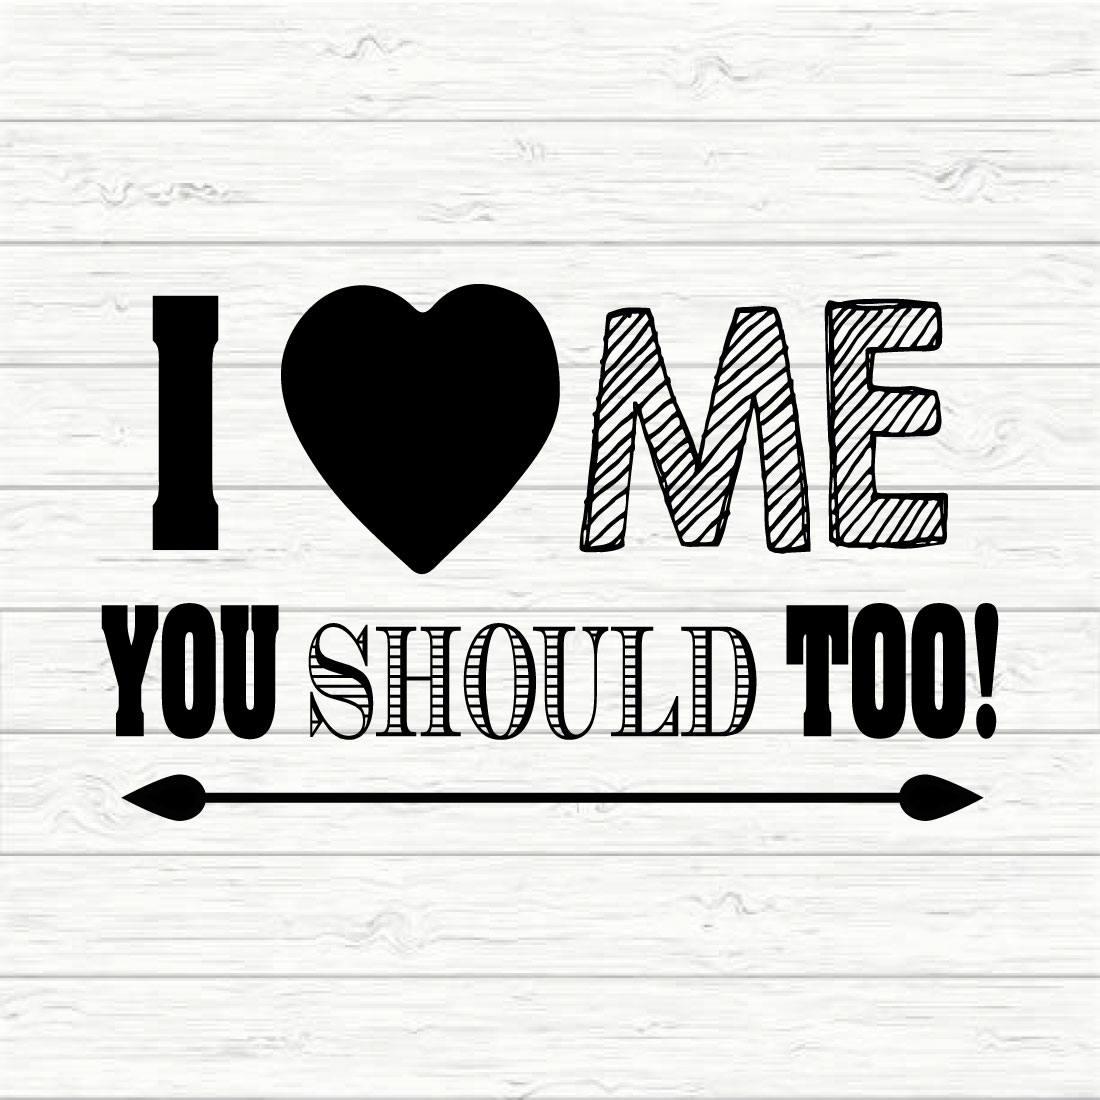 I Love Me You Should Too preview image.